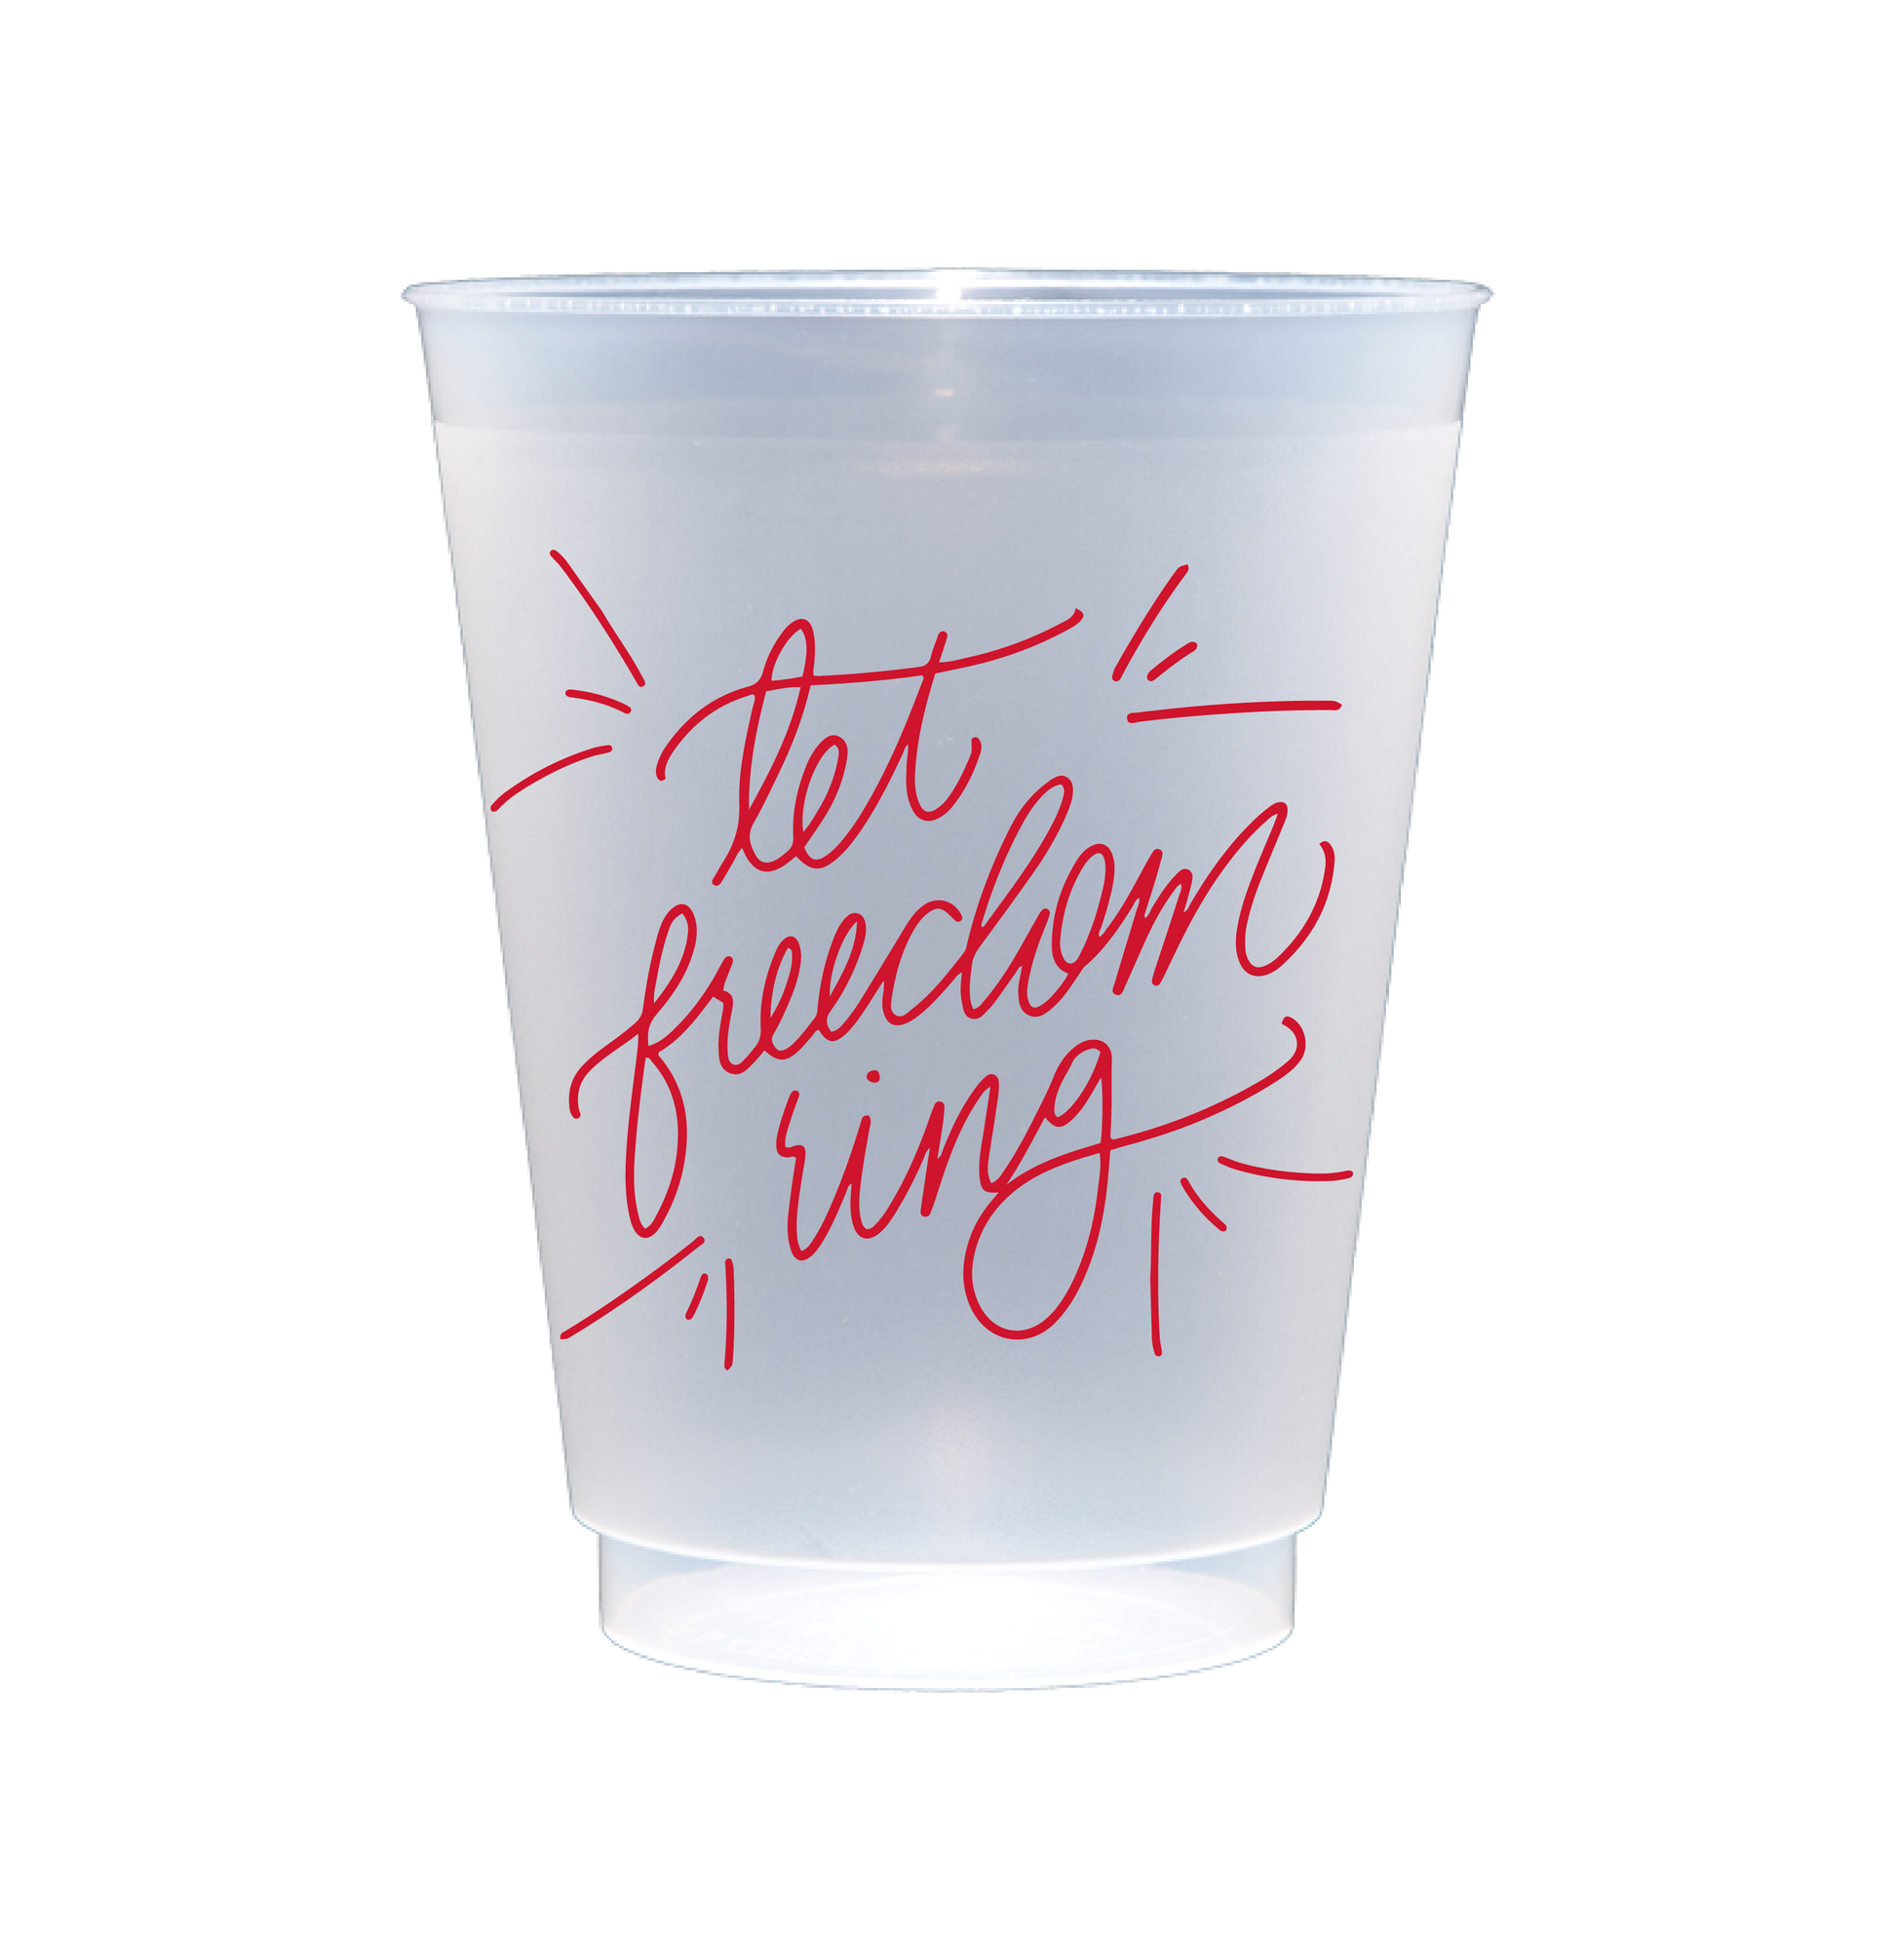 These cups are perfect for your Fourth of July or Memorial Day parties! Best of all, you can use these time and time again - they're dishwasher safe!  These patriotic cups come in a cellophane sleeve with a black and white striped ribbon tied in a bow at the top. 